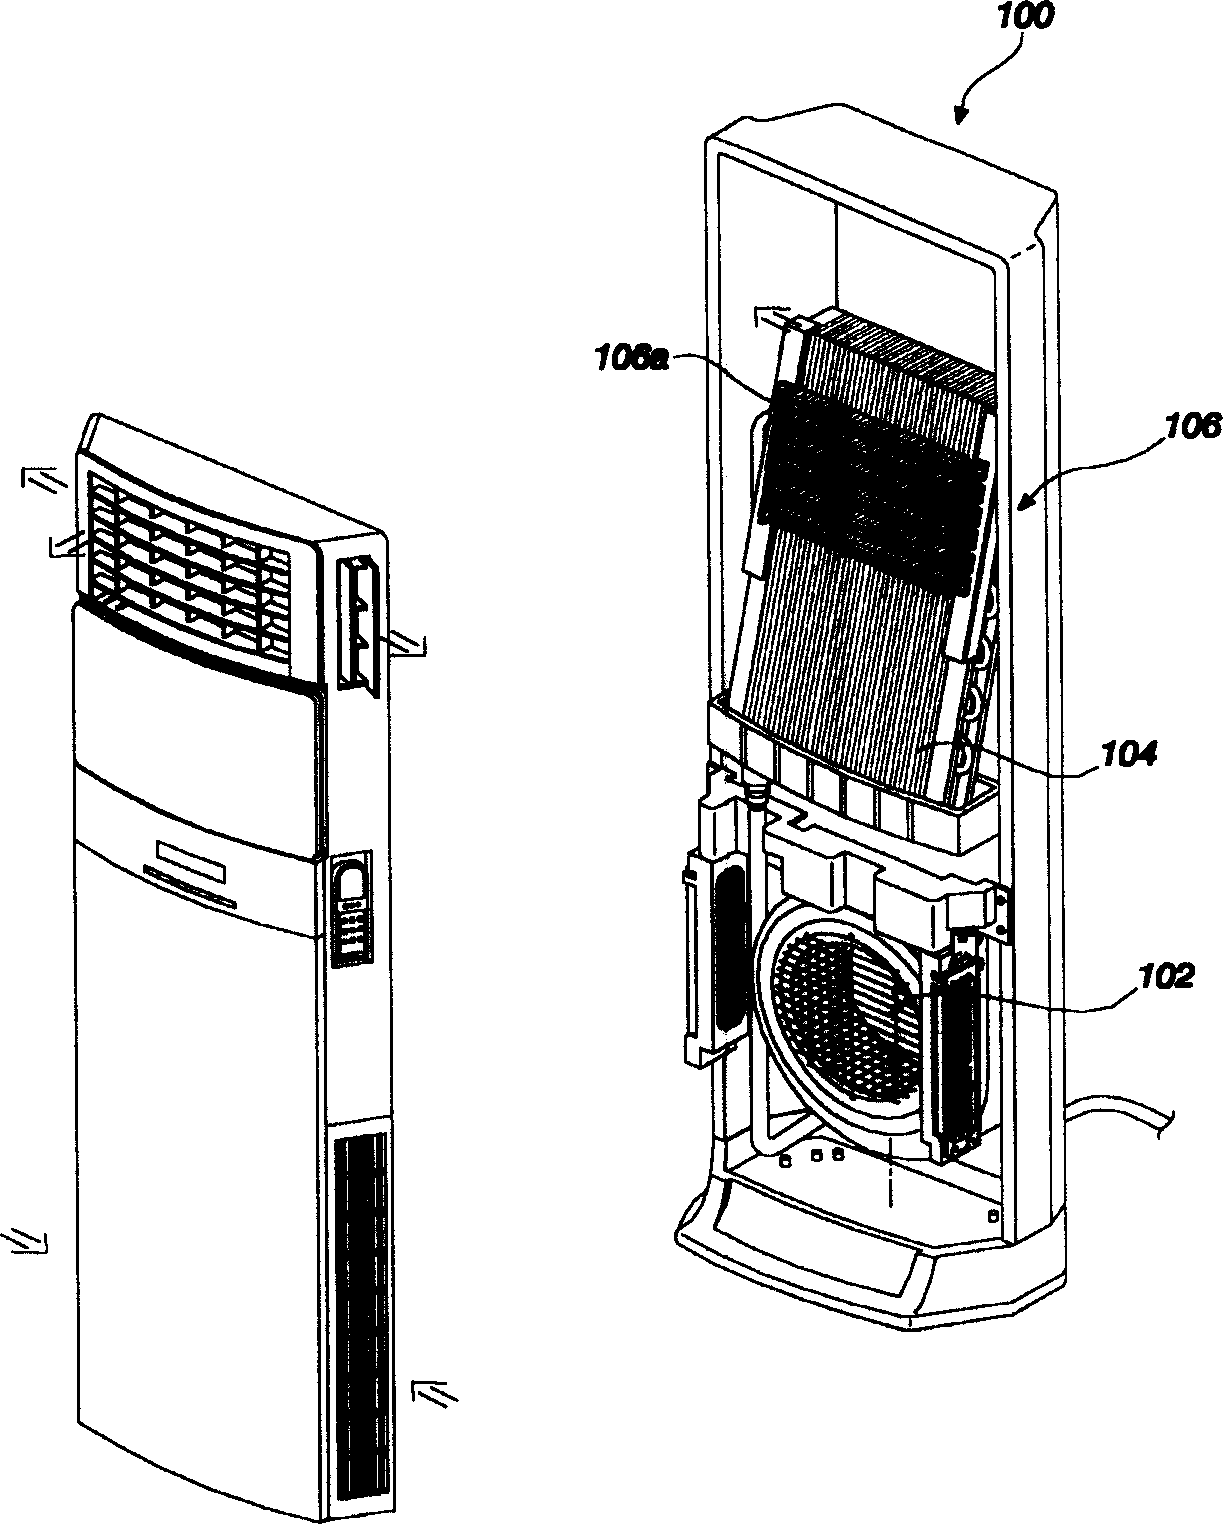 Heating device for air conditioners